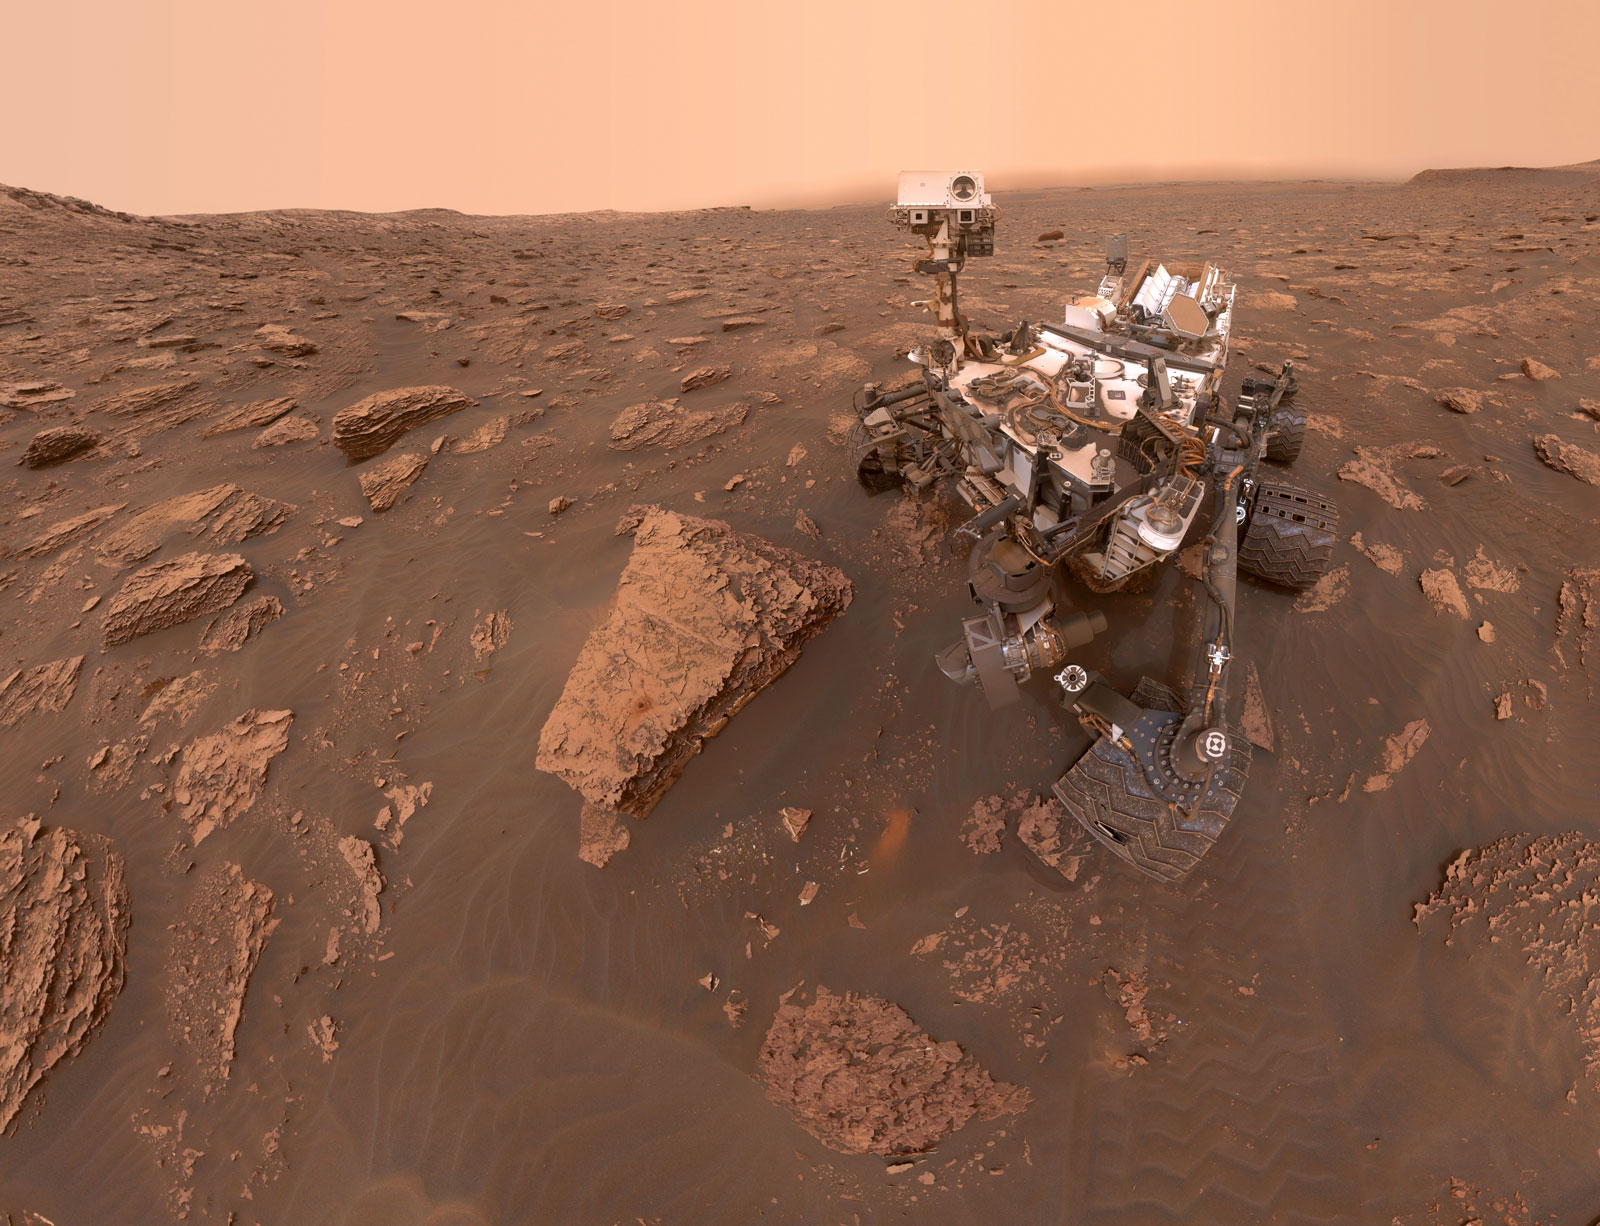 A self-portrait by NASA's Curiosity rover taken on Sol 2082 (June 15, 2018). A Martian dust storm has reduced sunlight and visibility at the rover's location in Gale Crater. A drill hole can be seen in the rock to the left of the rover at a target site called "Duluth."